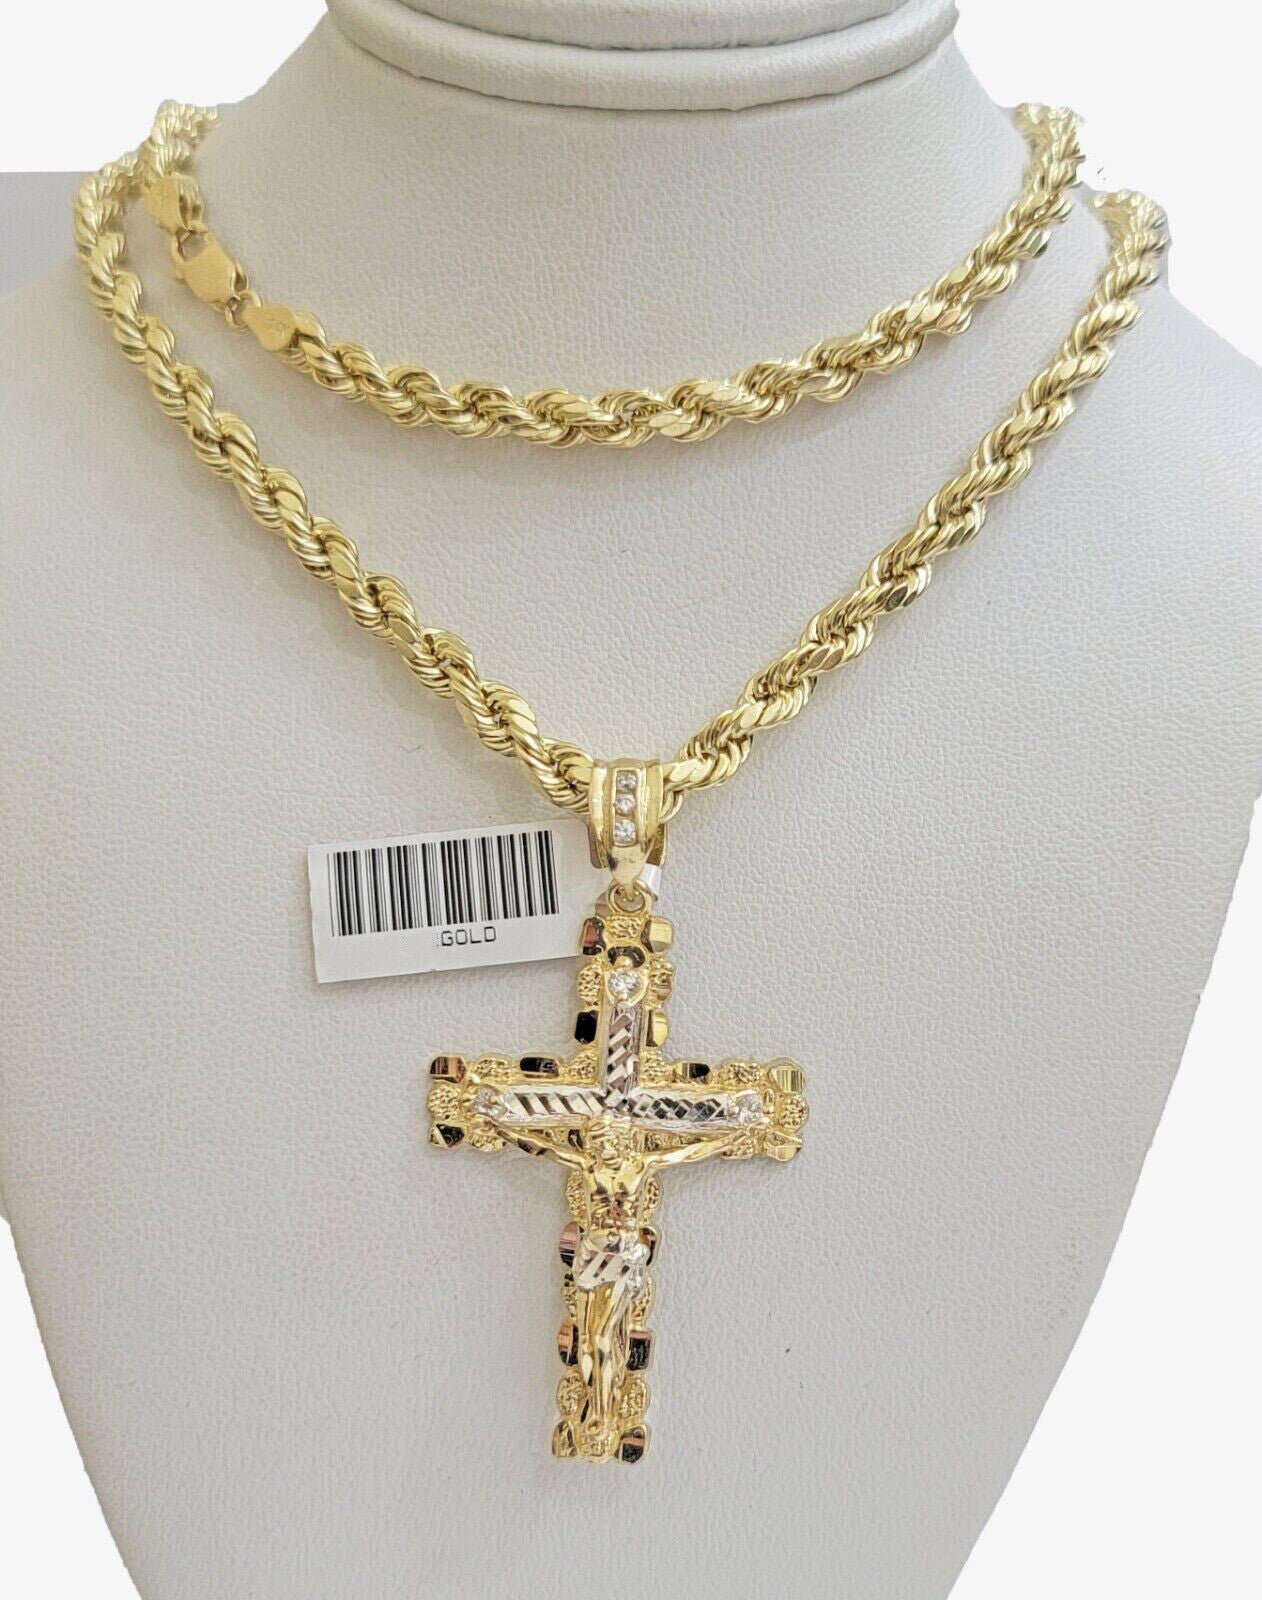 Real 10k Gold Rope 24 inch Chain Jesus Cross Charm Pendant Set 5mm Necklace Mens